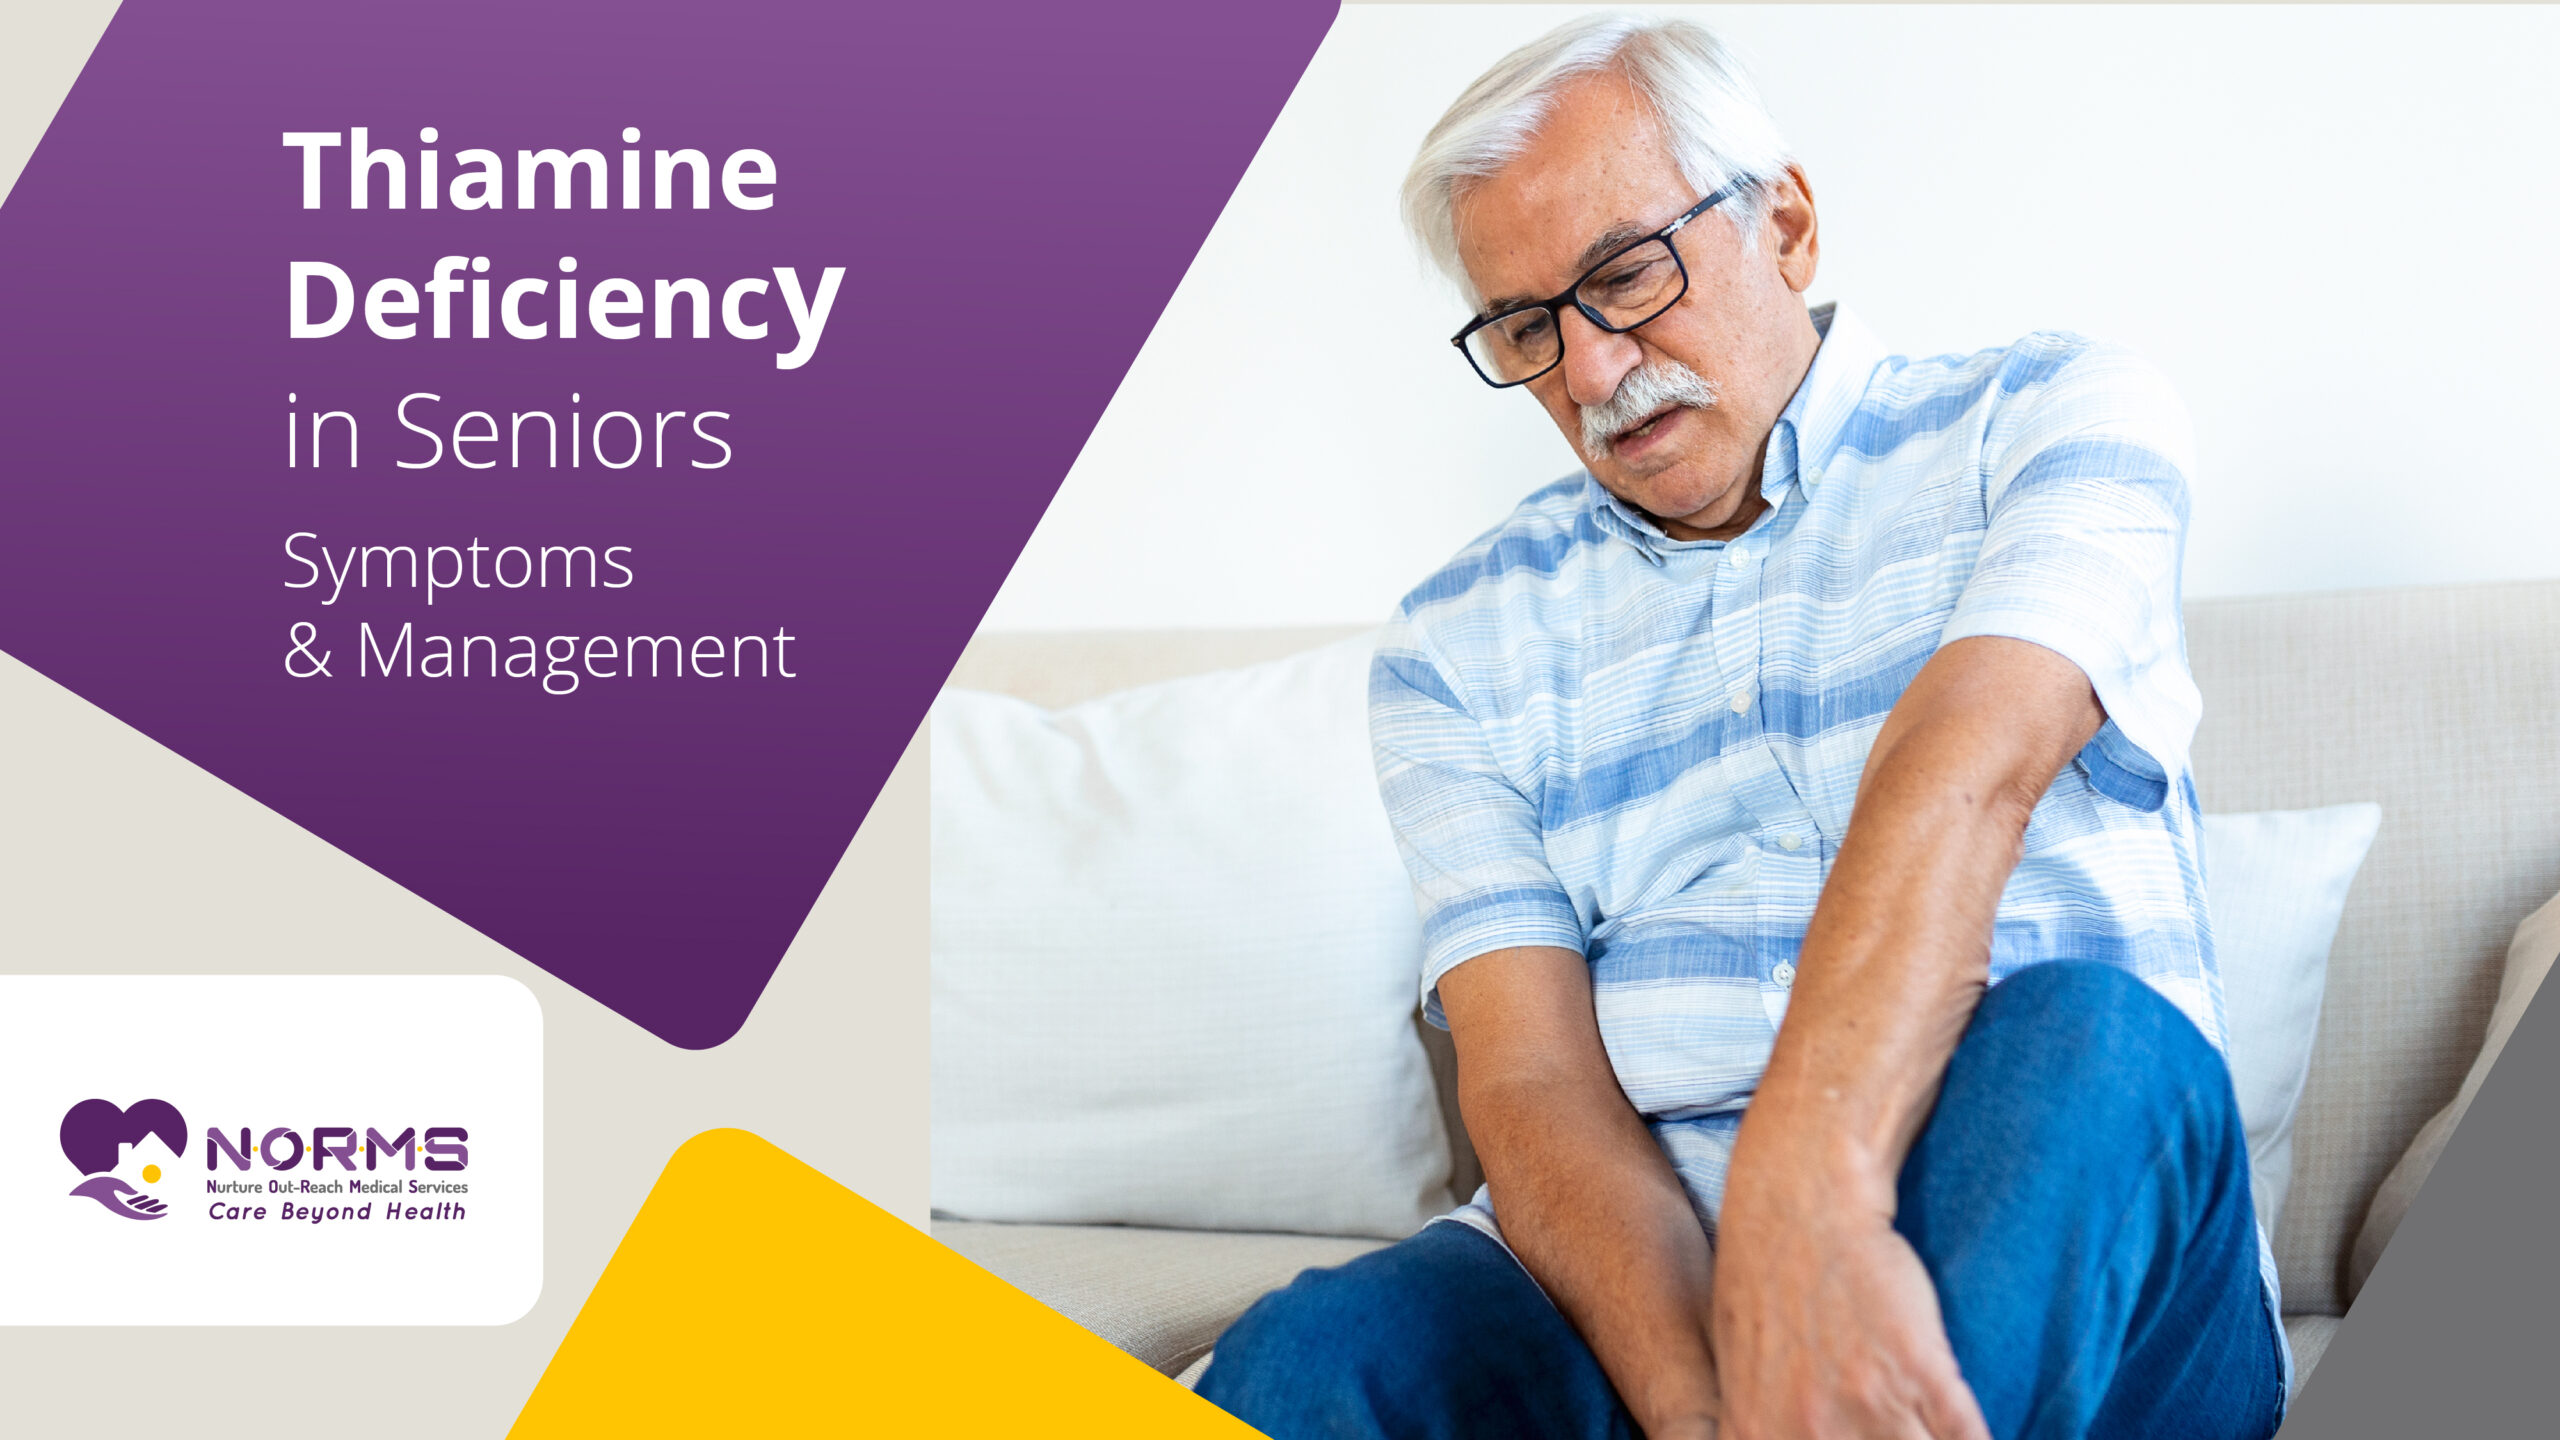 Thiamine Deficiency in Seniors: Symptoms and Management